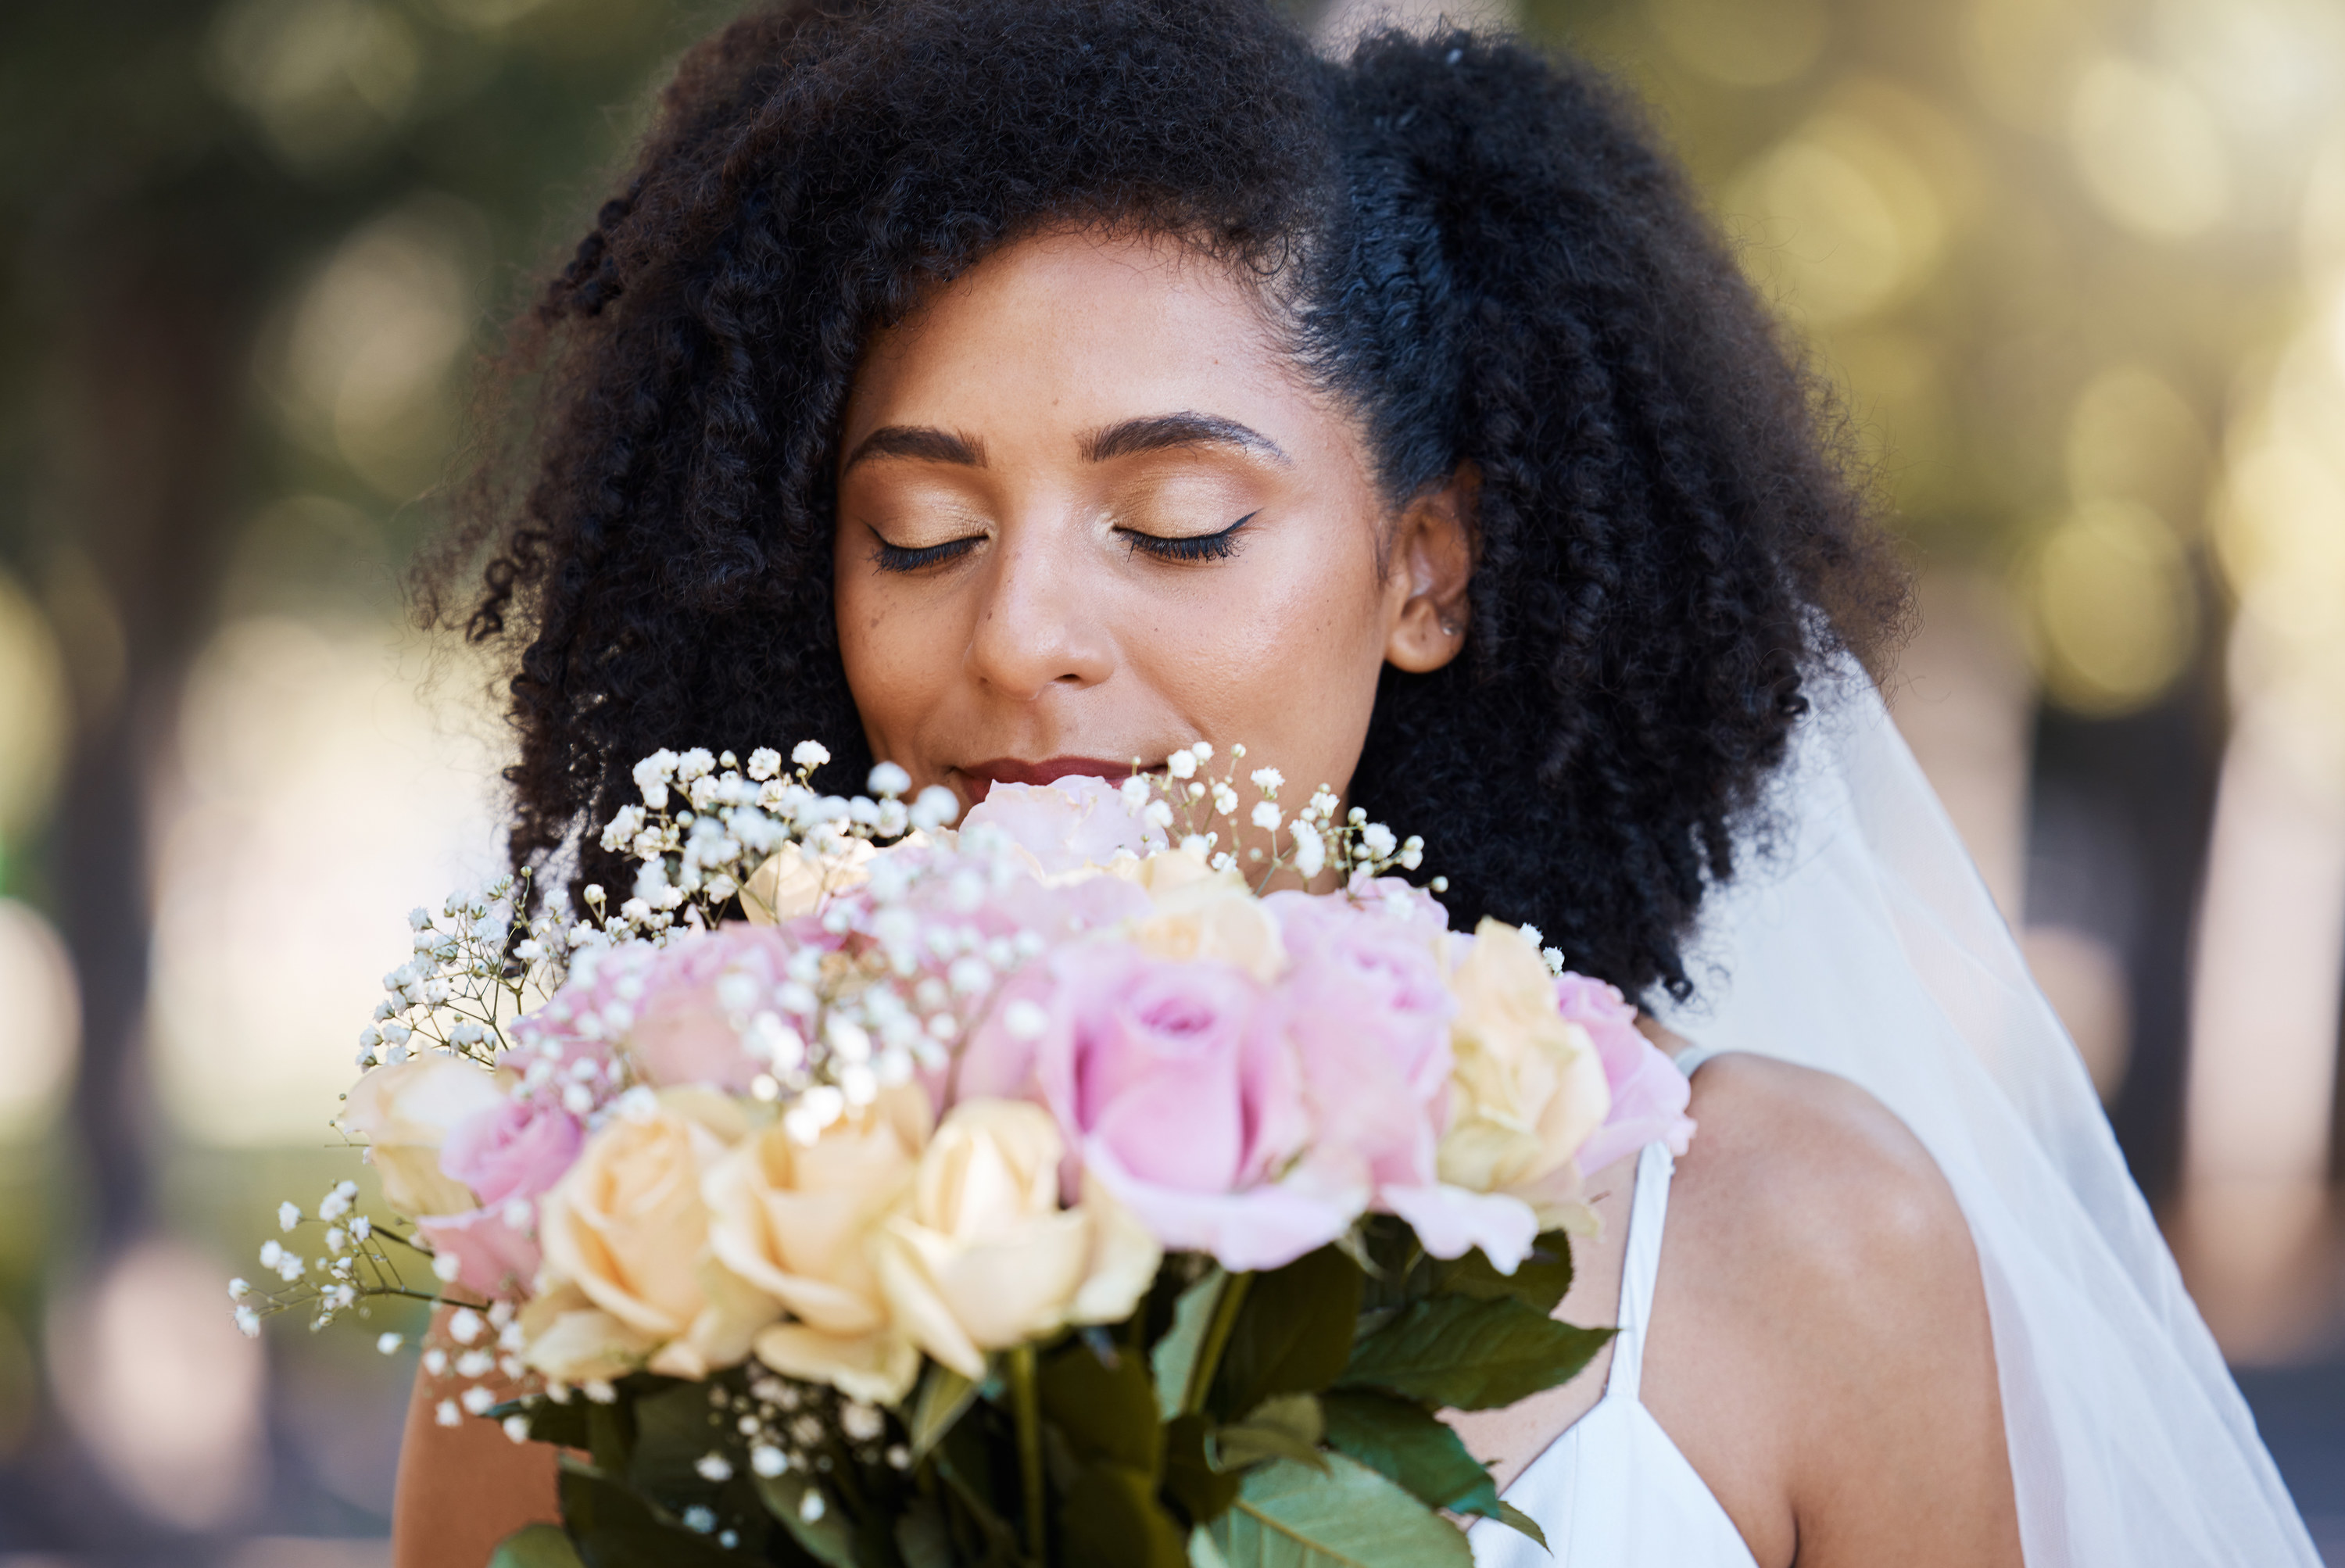 A bride smelling the flowers in her bouquet